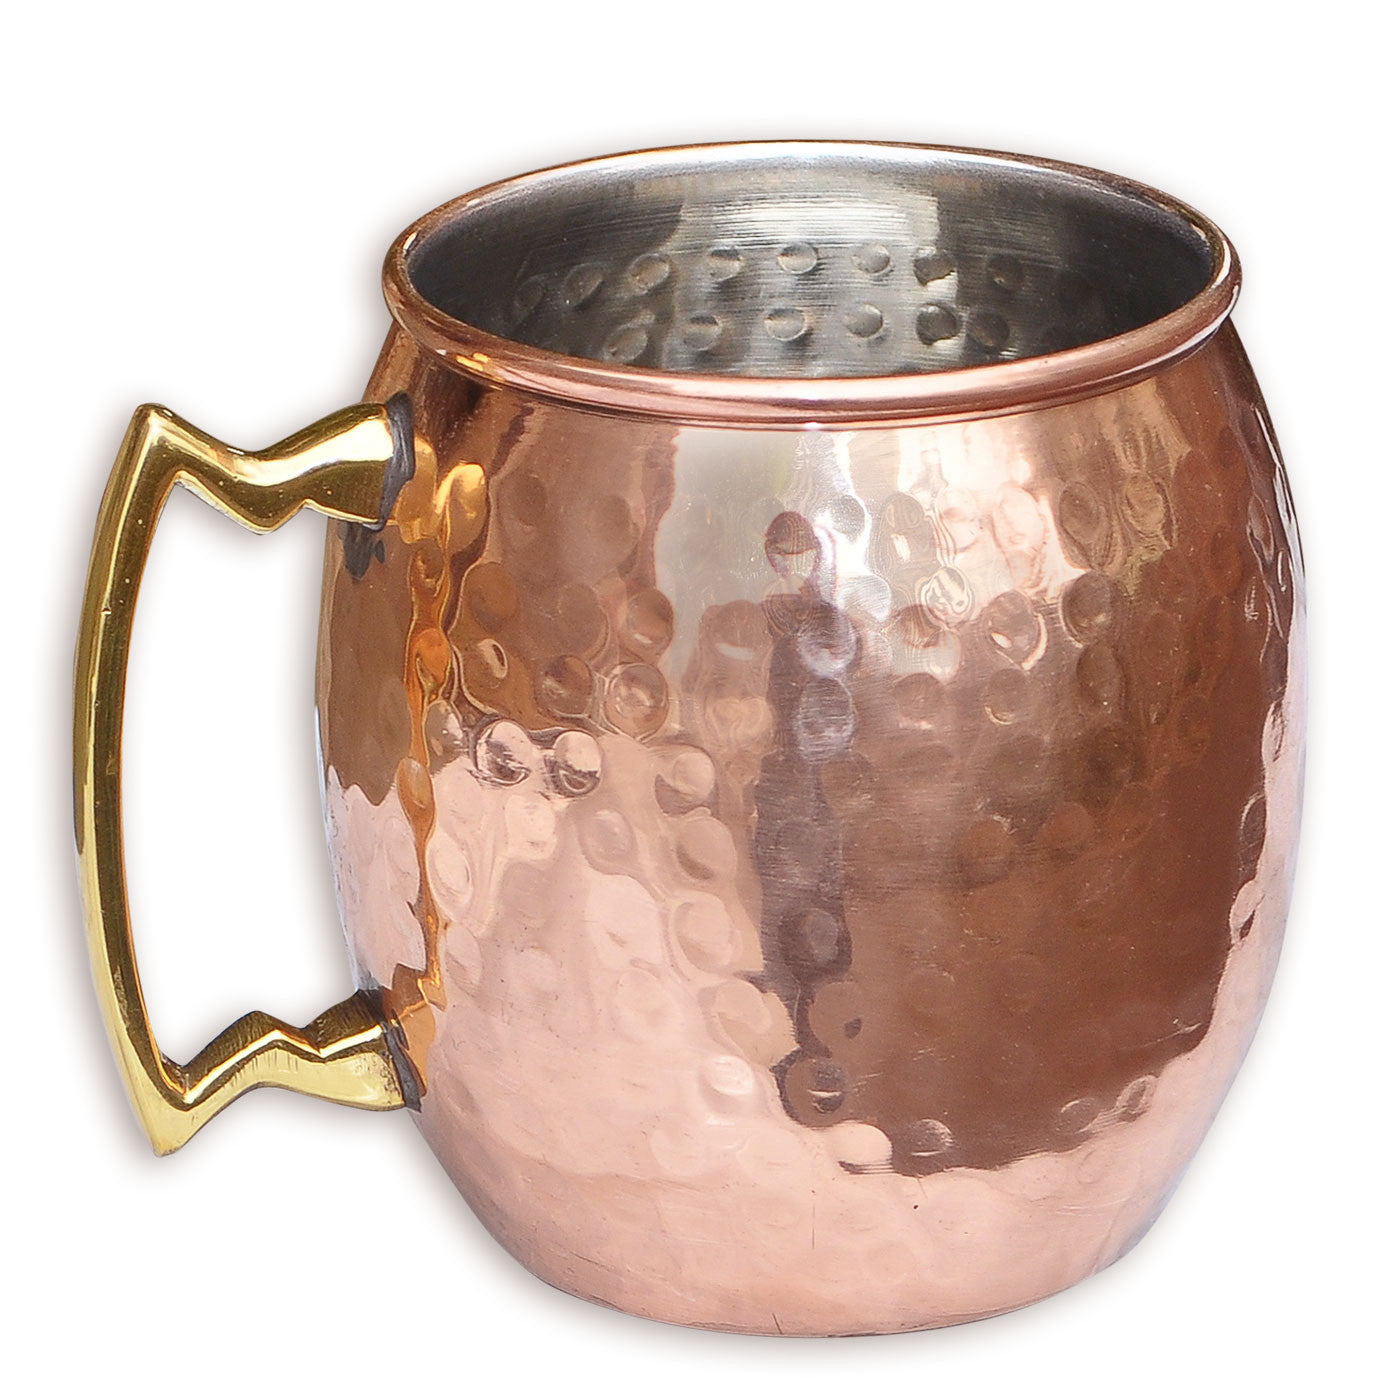 Mulled Wine & Cider Mug - Glass & Stainless Steel with Gold Finish - 12 oz